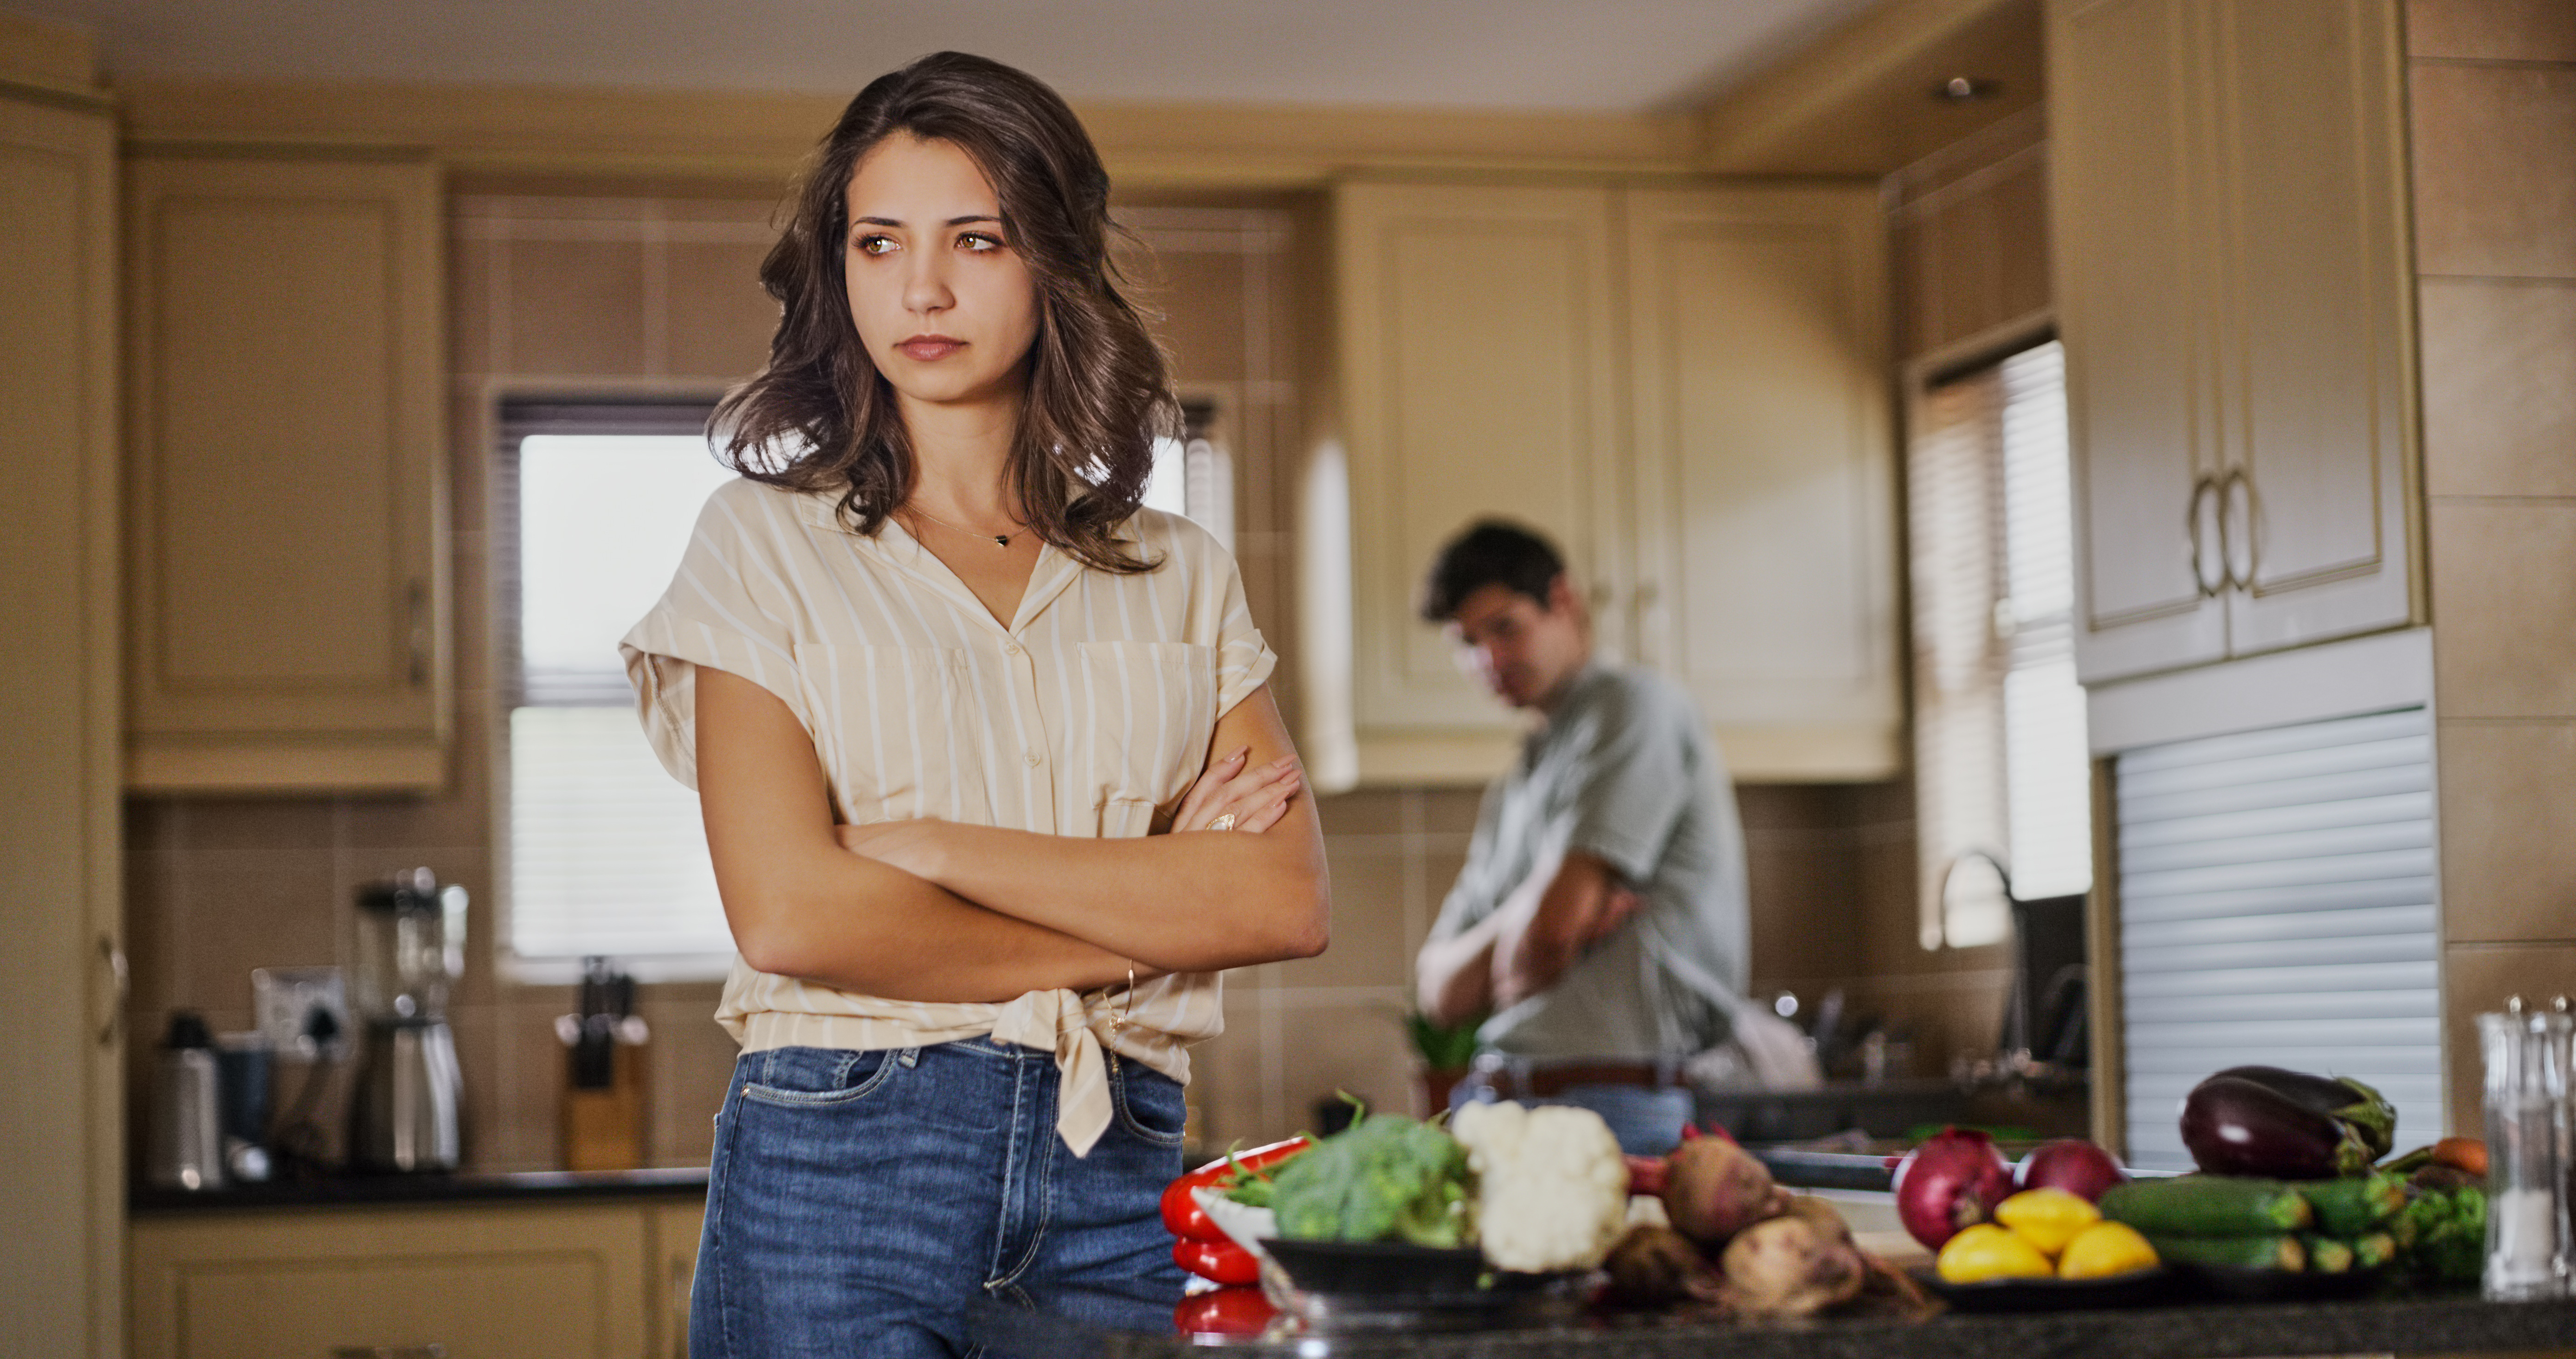 A woman who is upset at her husband who is standing in the background | Source: Getty Images